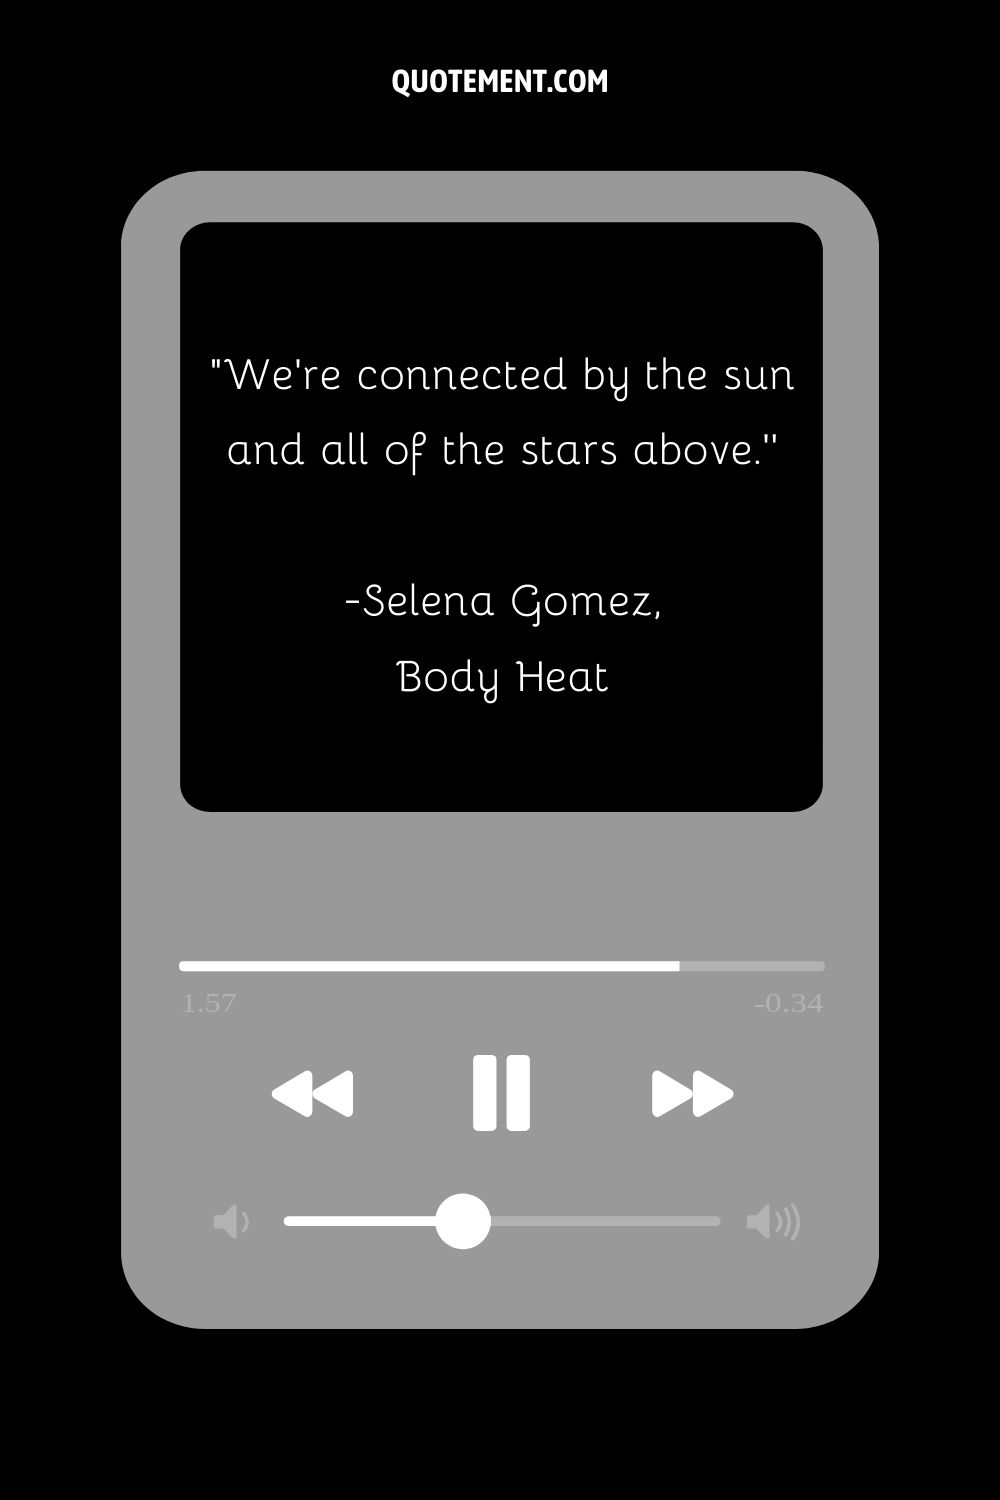 “We’re connected by the sun and all of the stars above.”— Selena Gomez, Body Heat